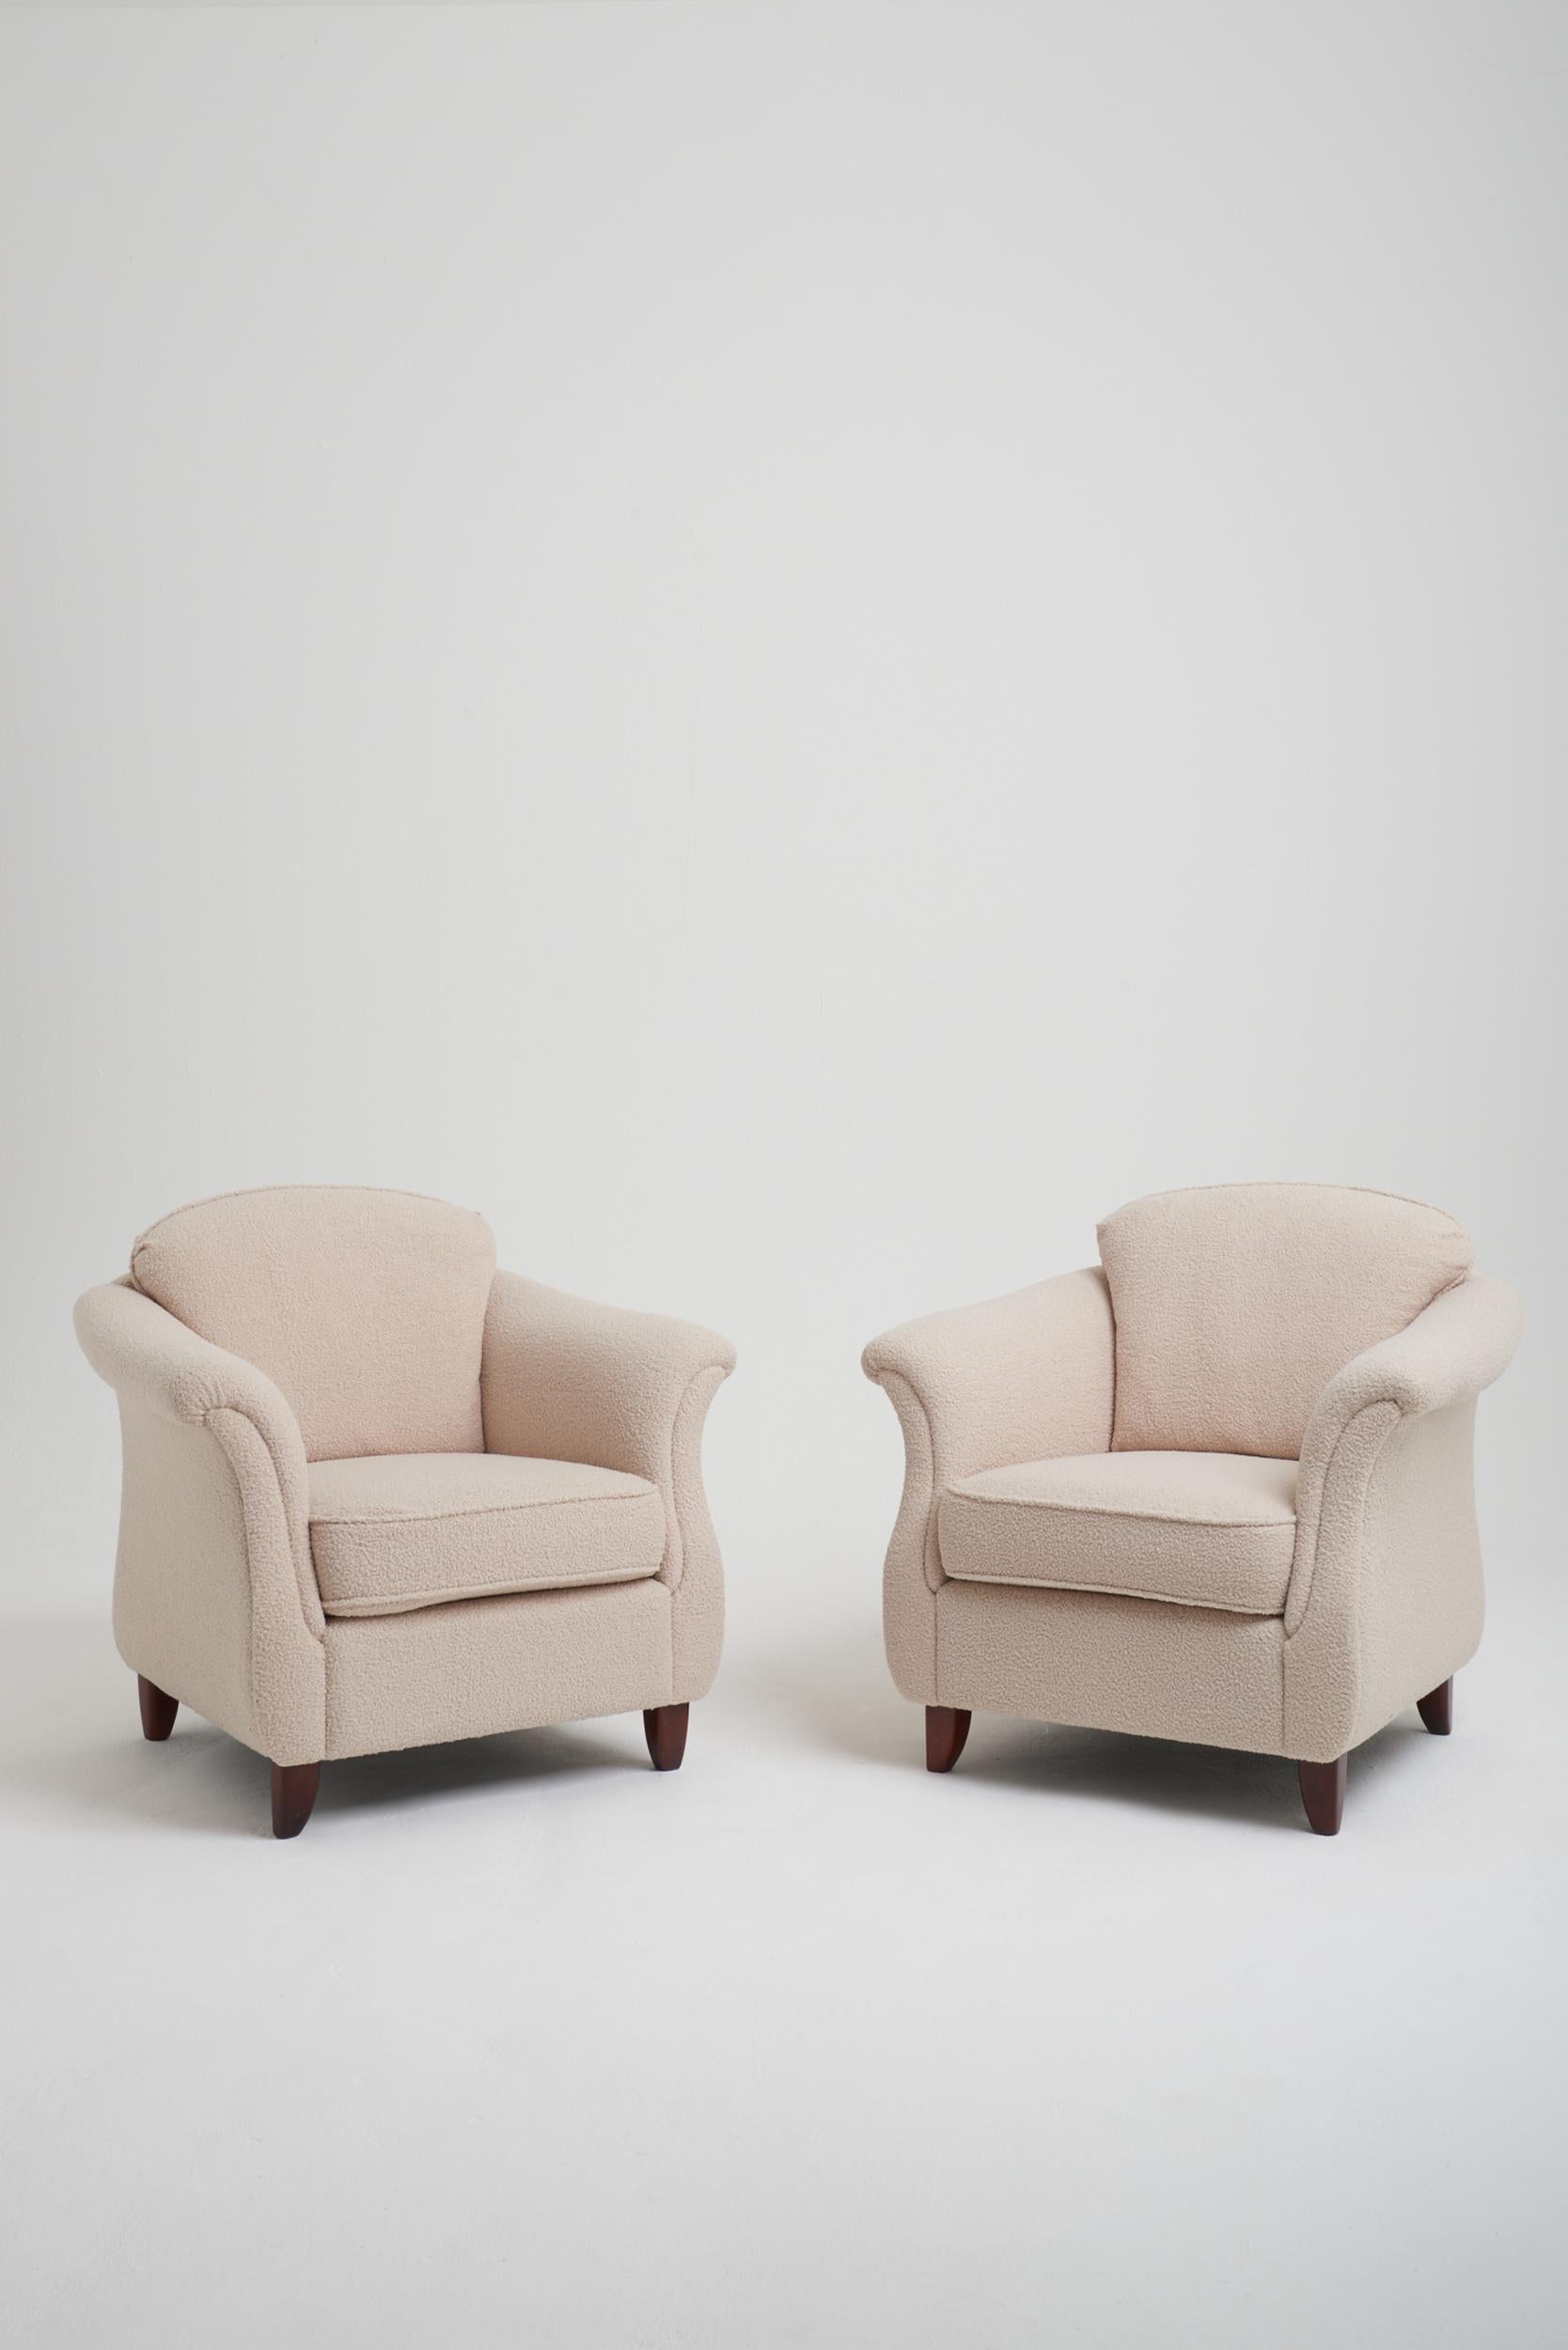 A pair of Swedish Modern armchairs, upholstered in bouclé.
Sweden, third quarter of the 20th century.